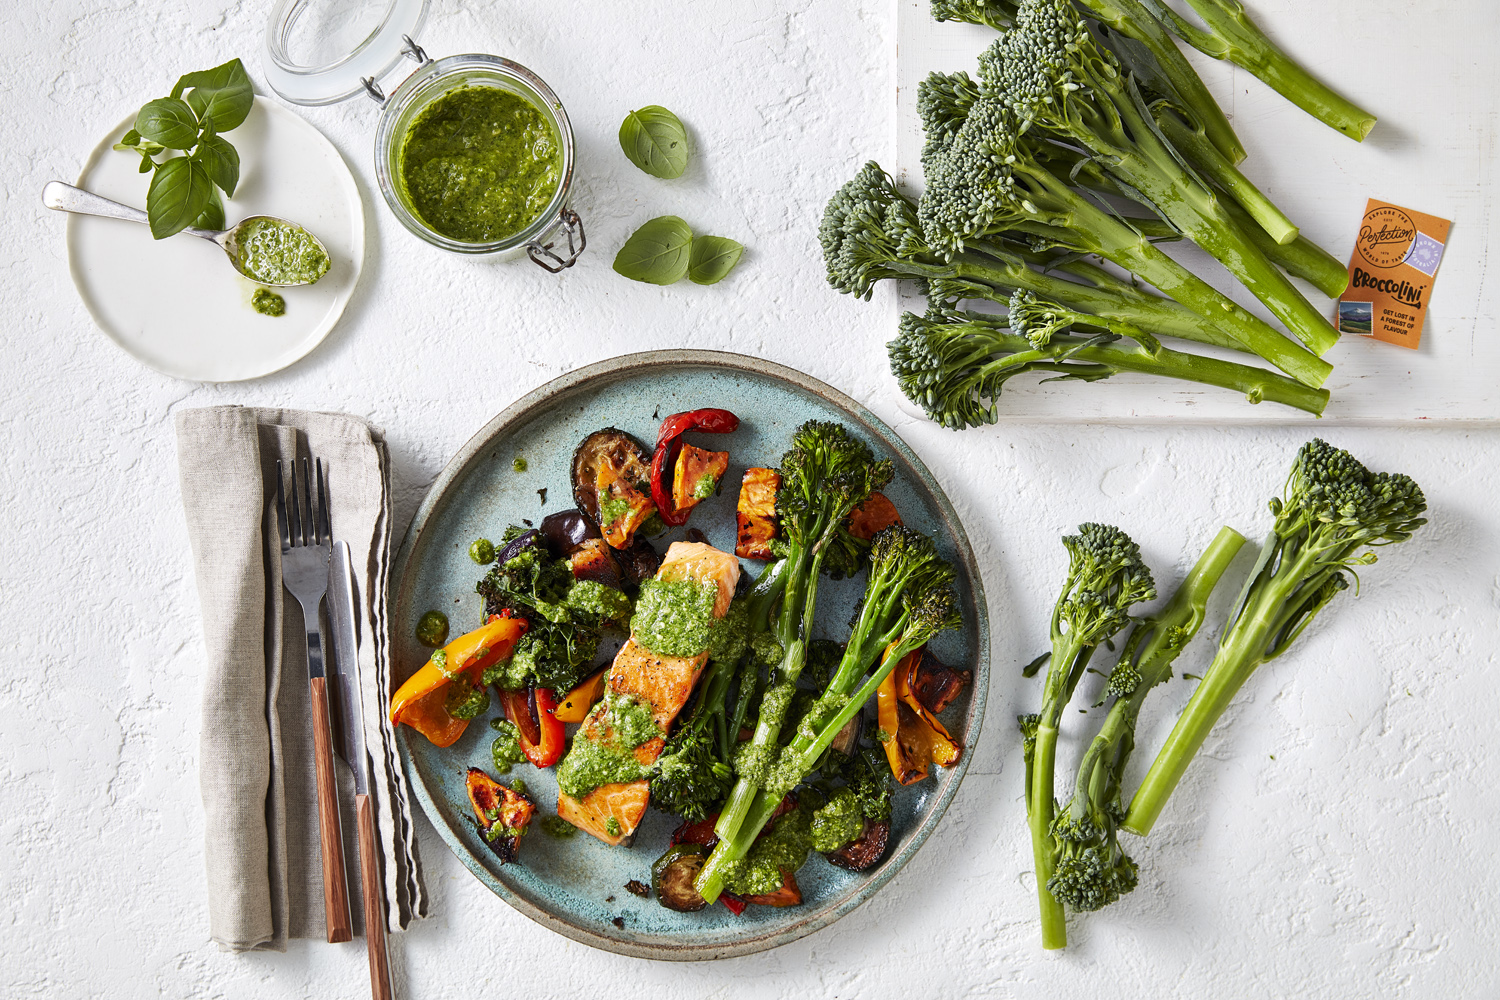 Oven Baked Broccolini And Crispy Salmon